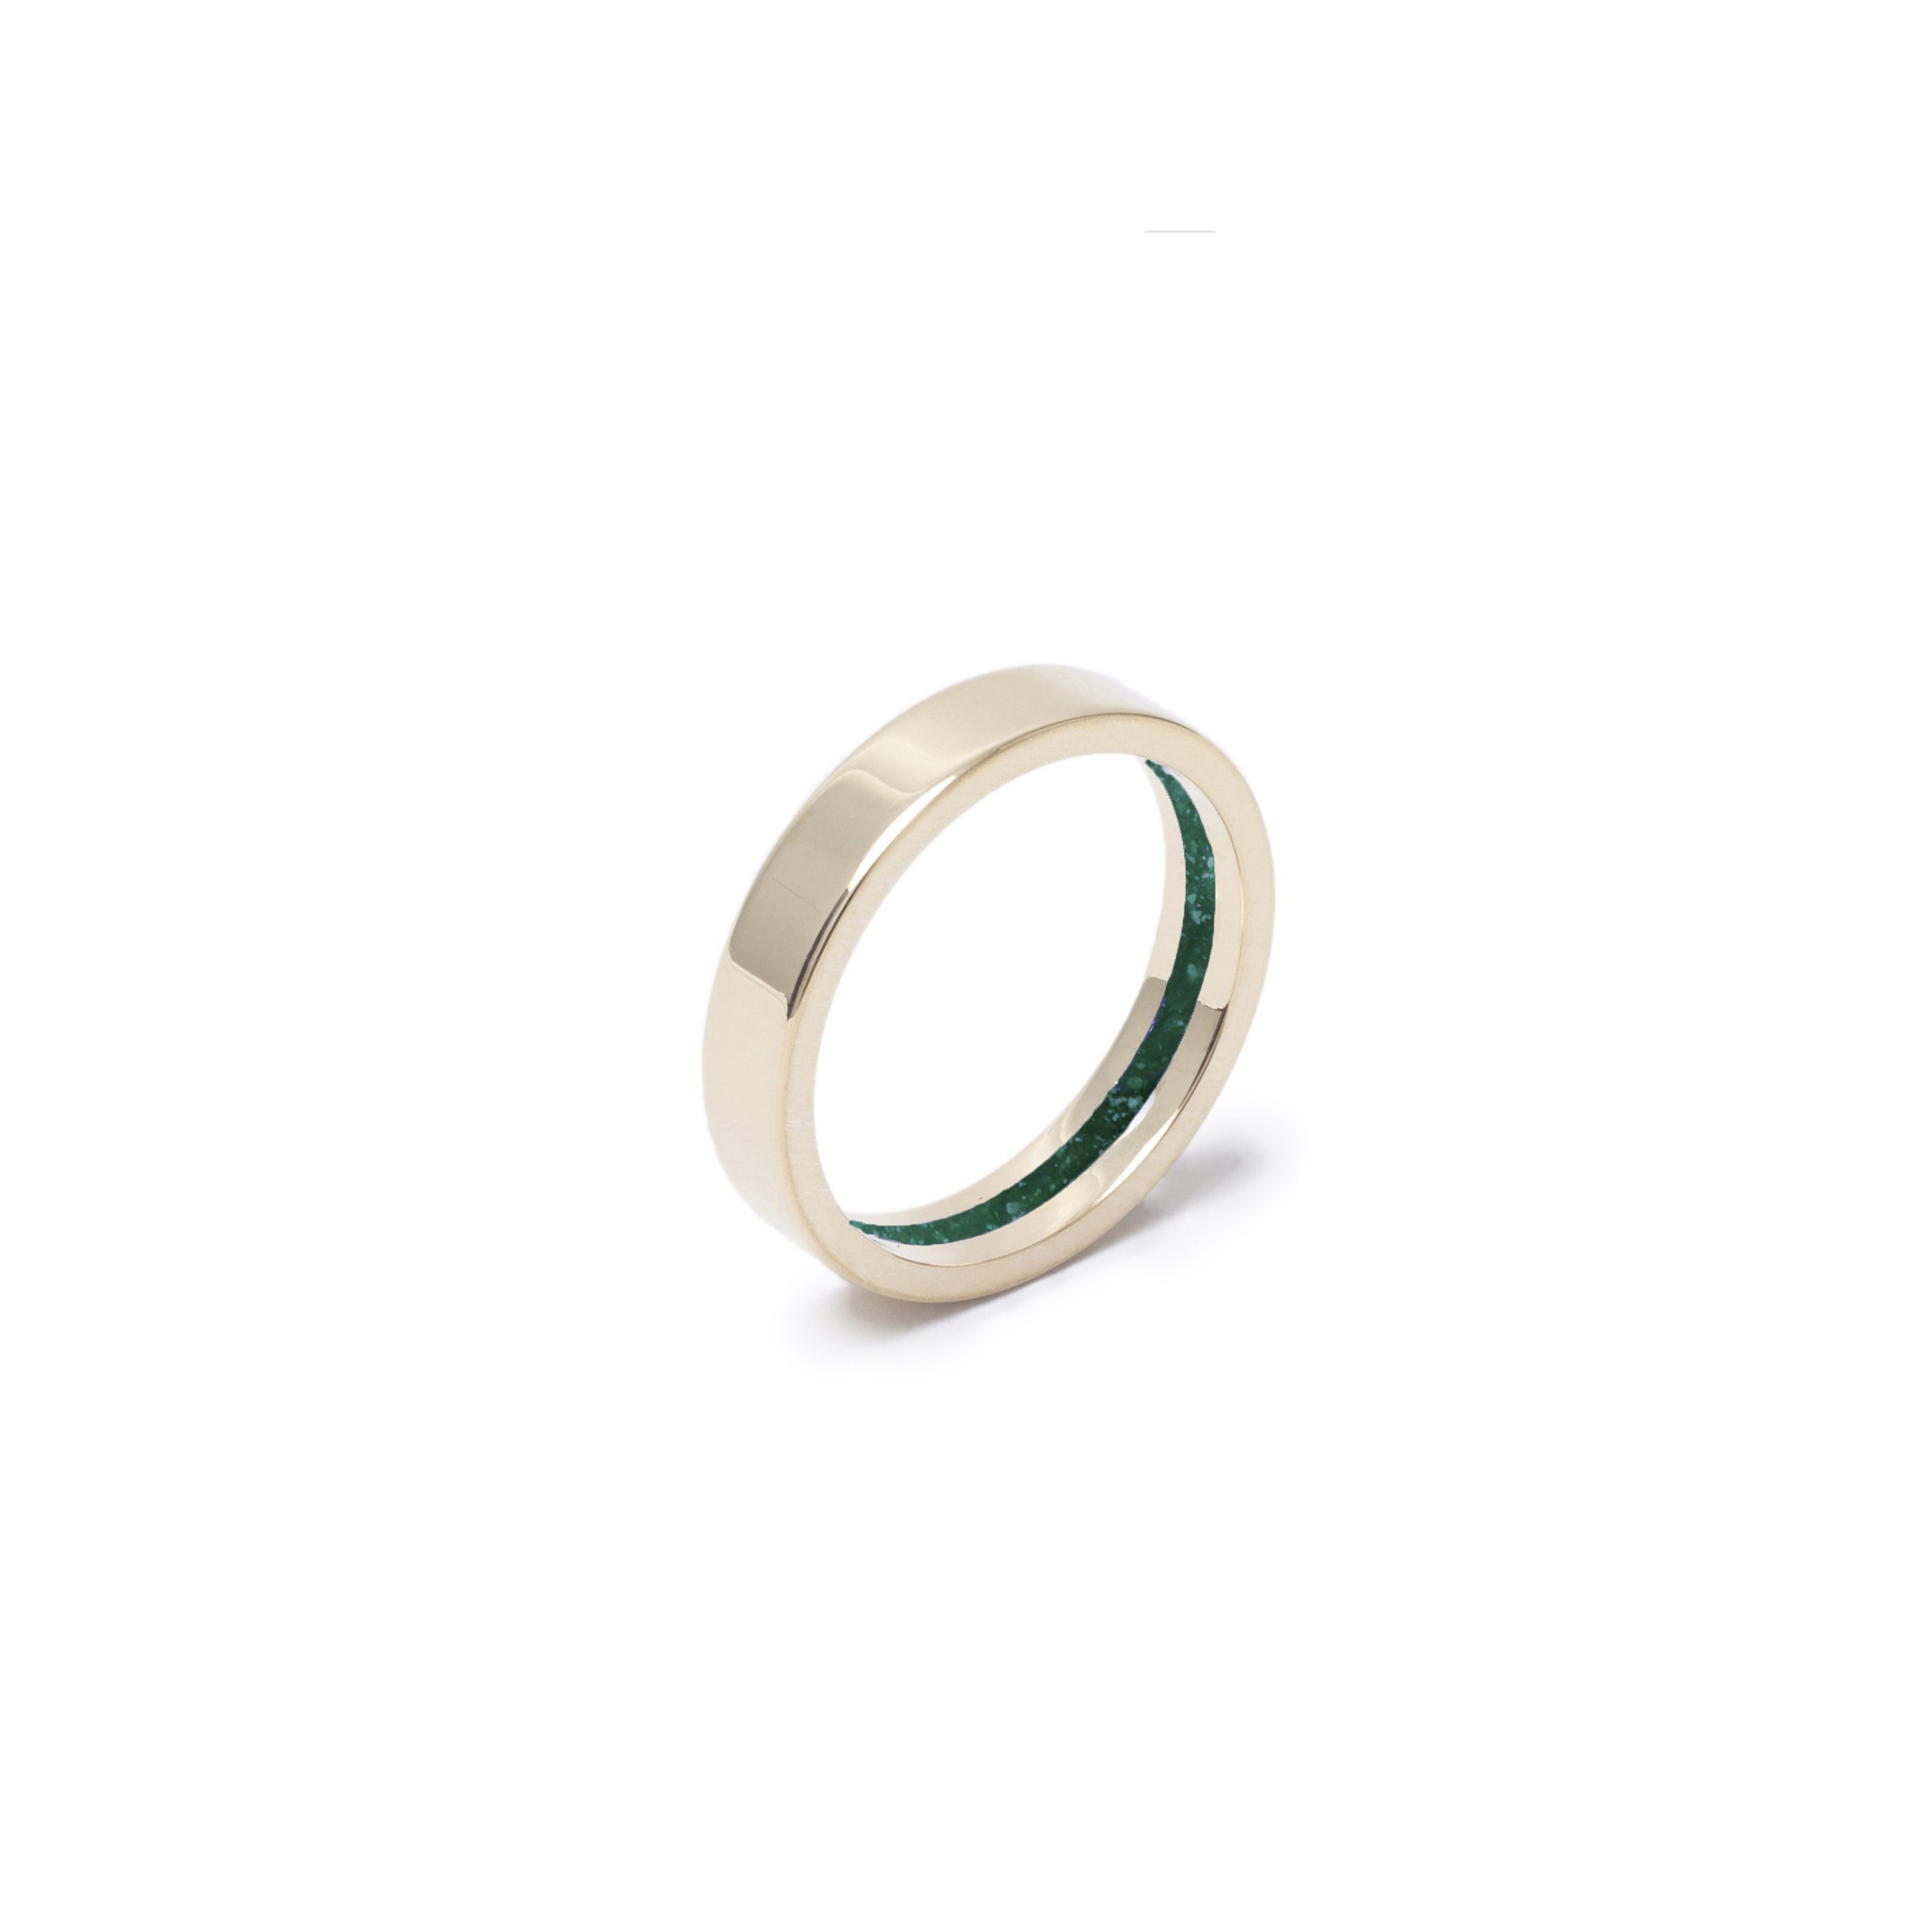 Everence Ring, 10k Yellow Gold everence.life 4mm Emerald 